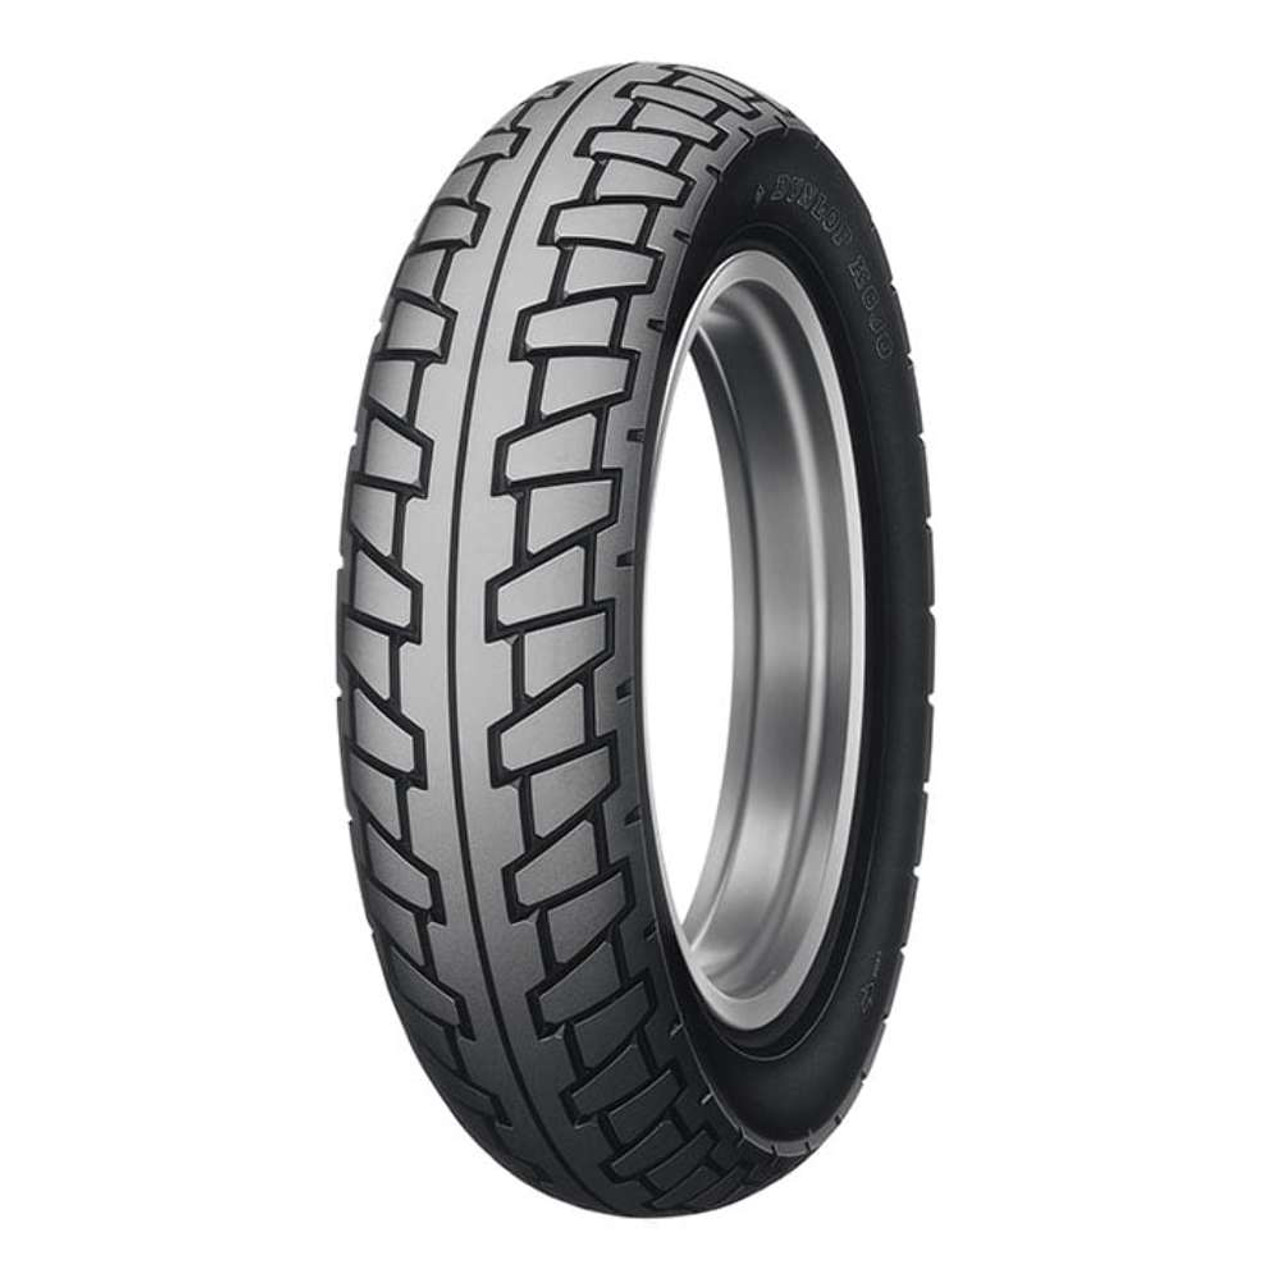 Dunlop Geomax Mx11 80/100-21 Front Motorcycle - American Moto Tire